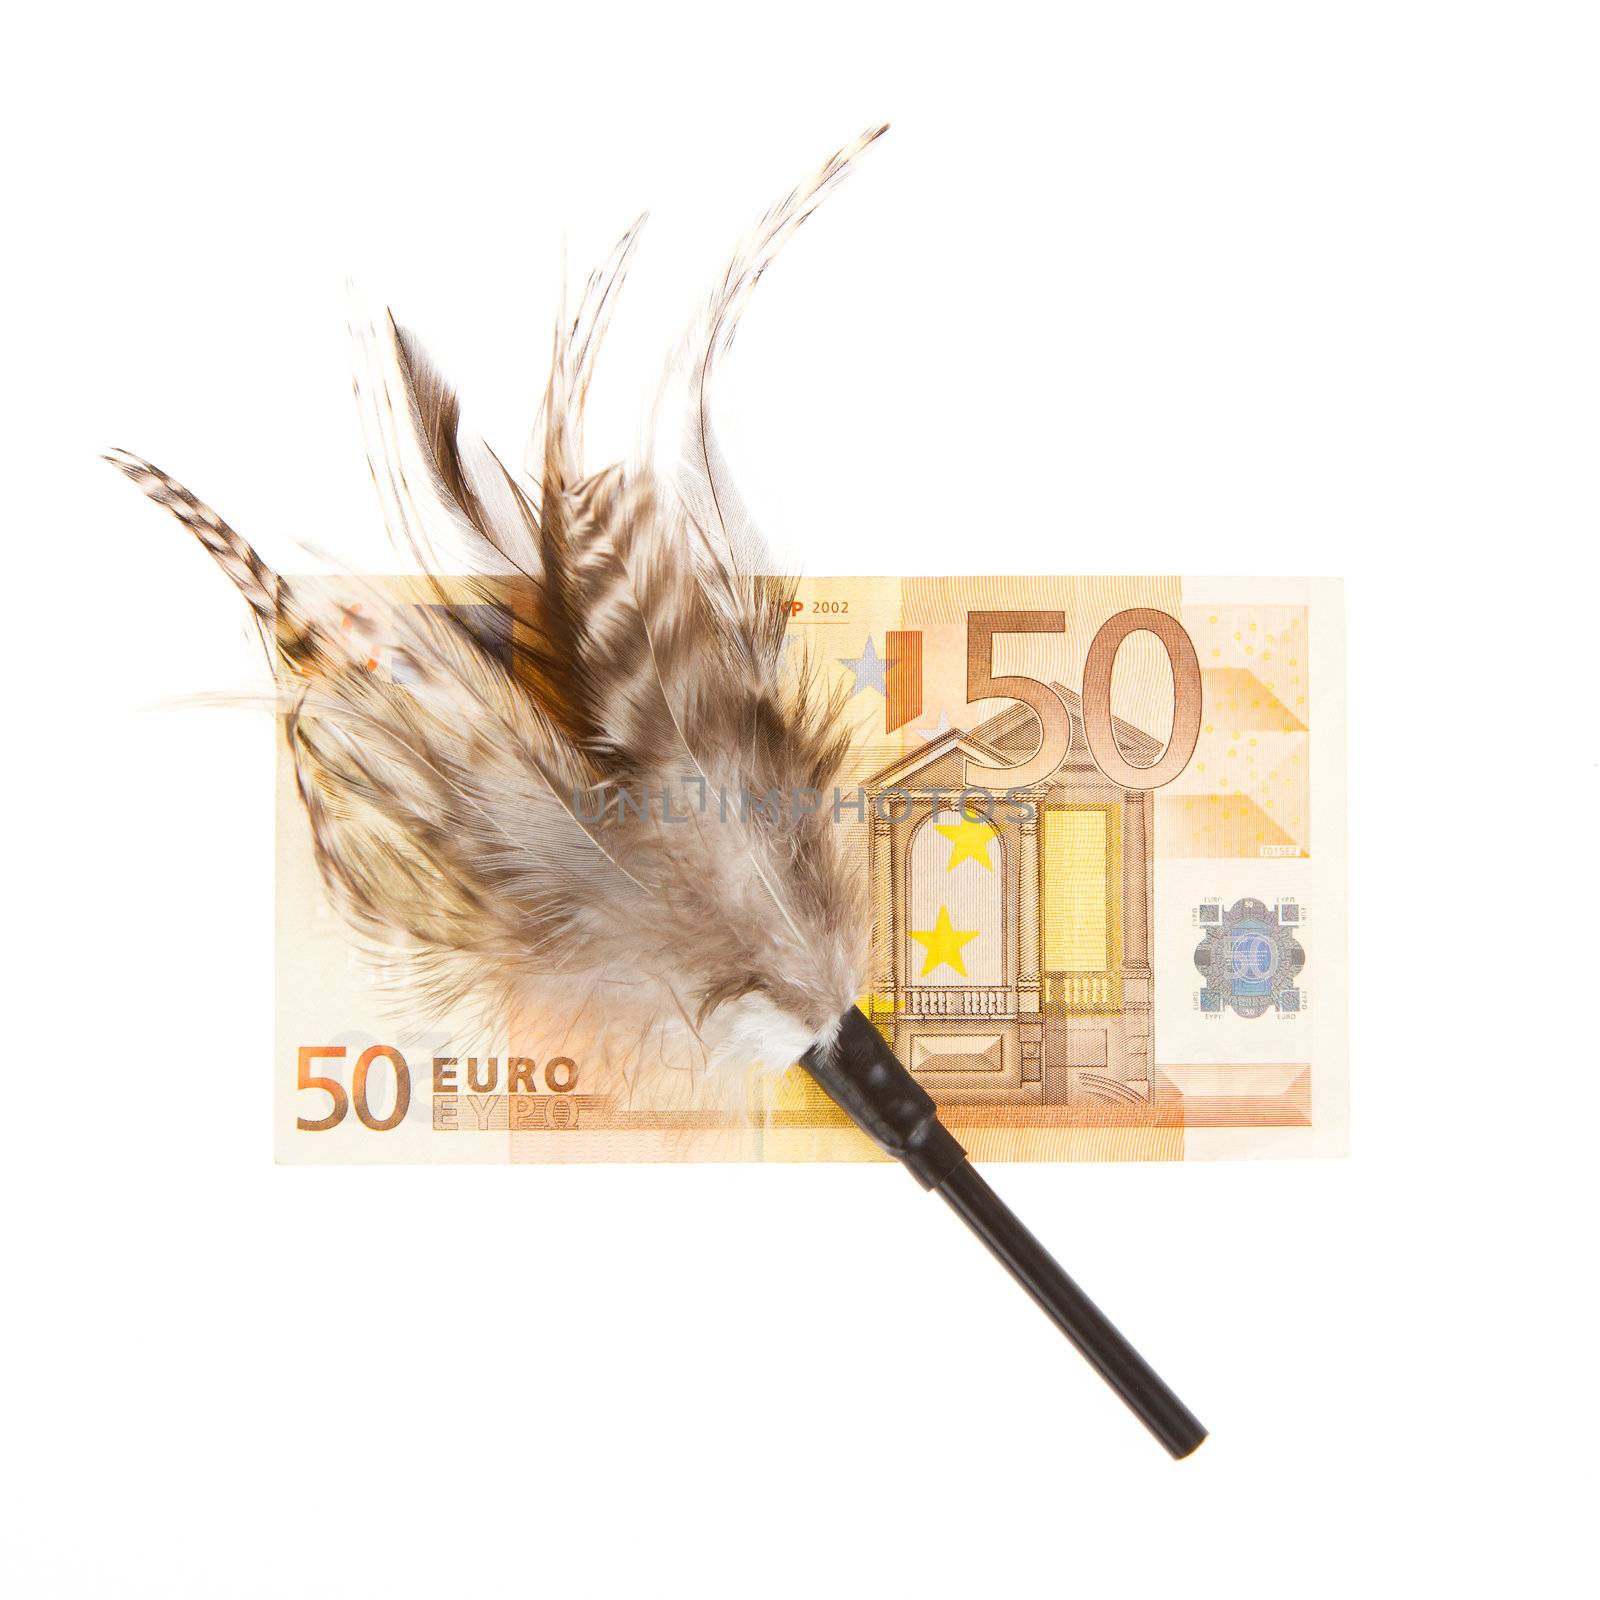 Feathers for teasing with money, prostitution by michaklootwijk